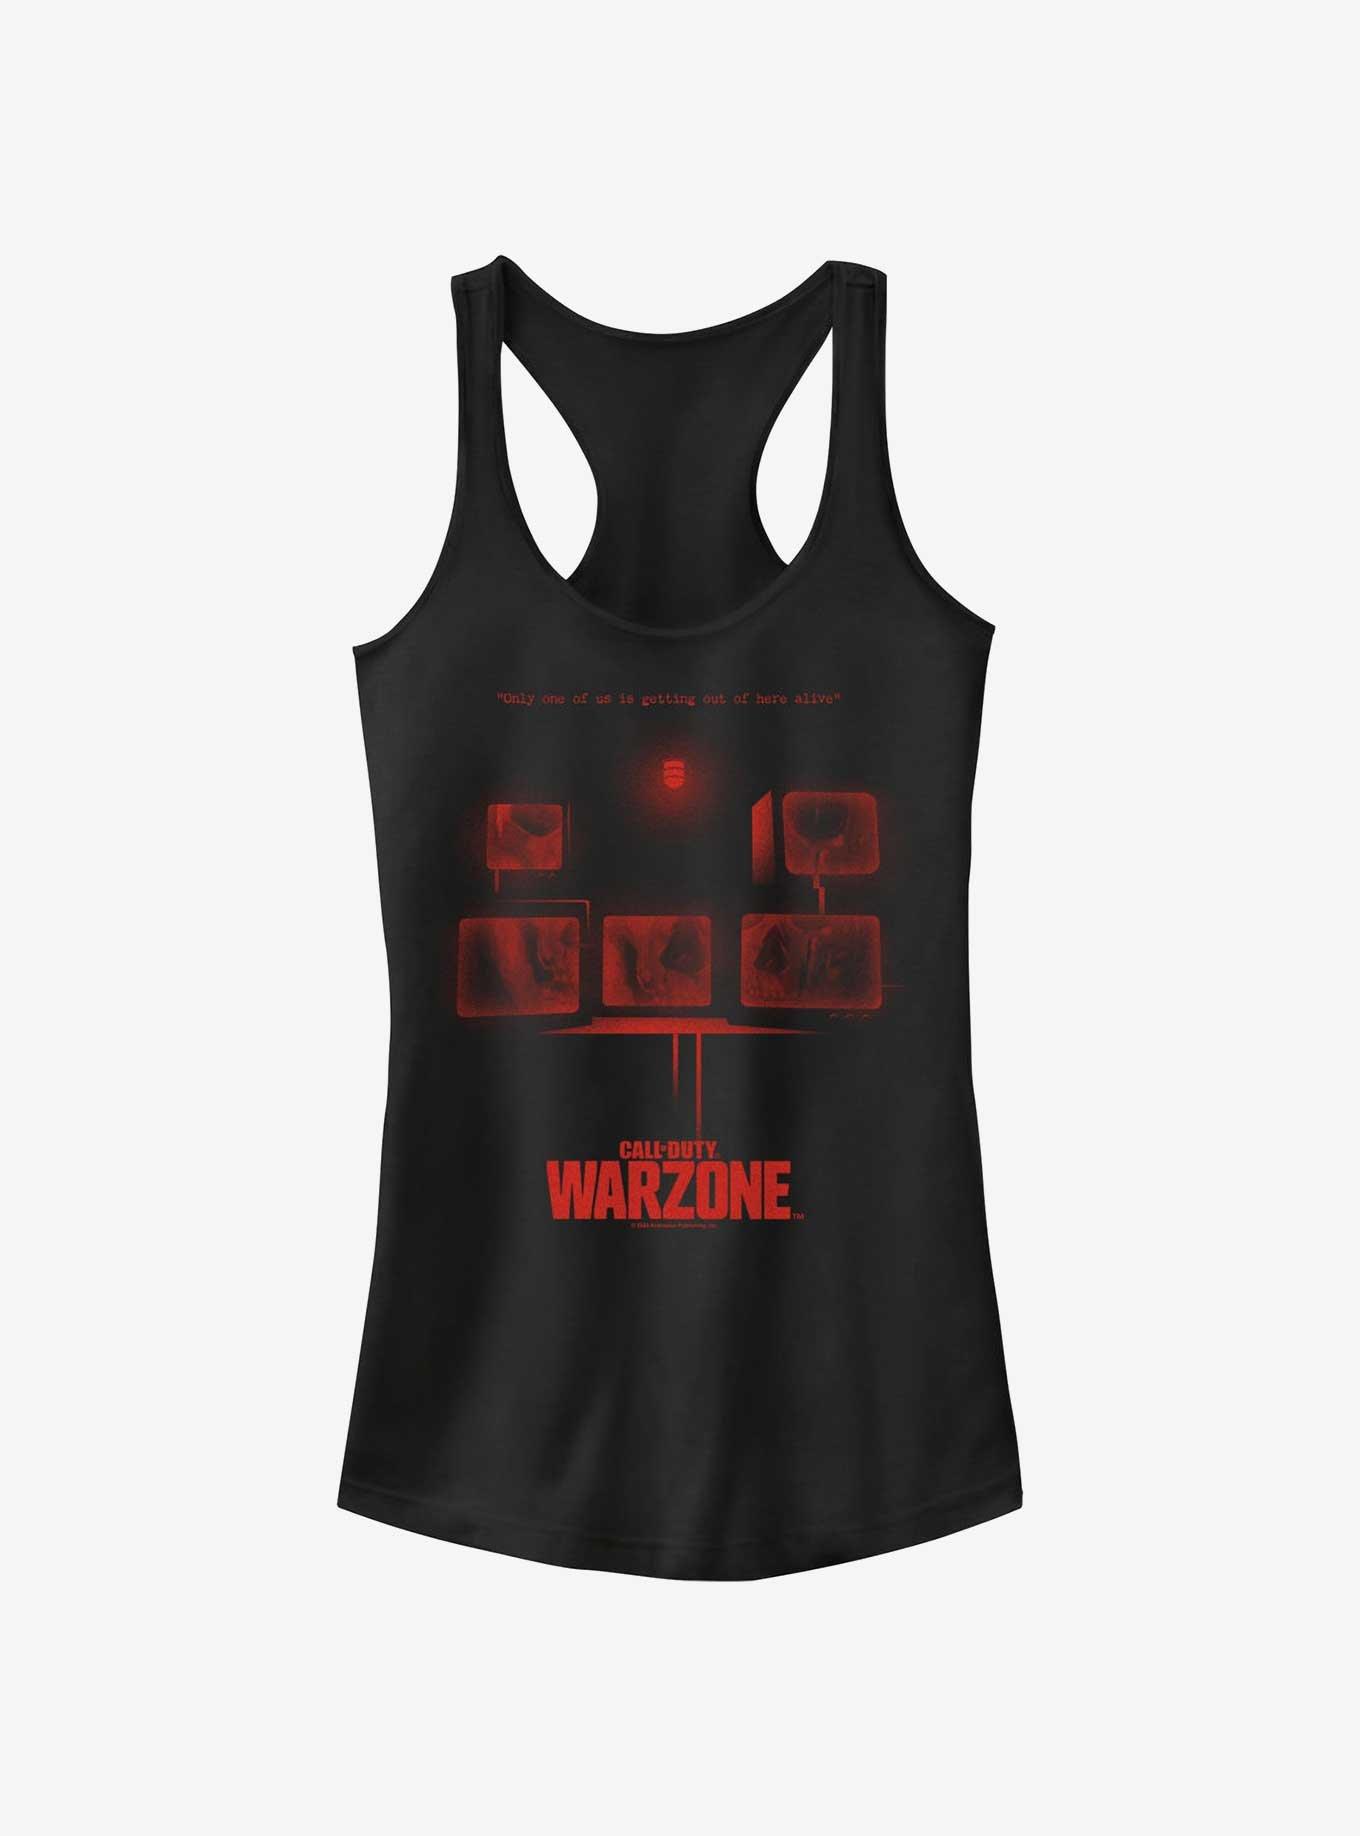 Call of Duty: Warzone Ghost Faces Televisions Girls Tank, BLACK, hi-res